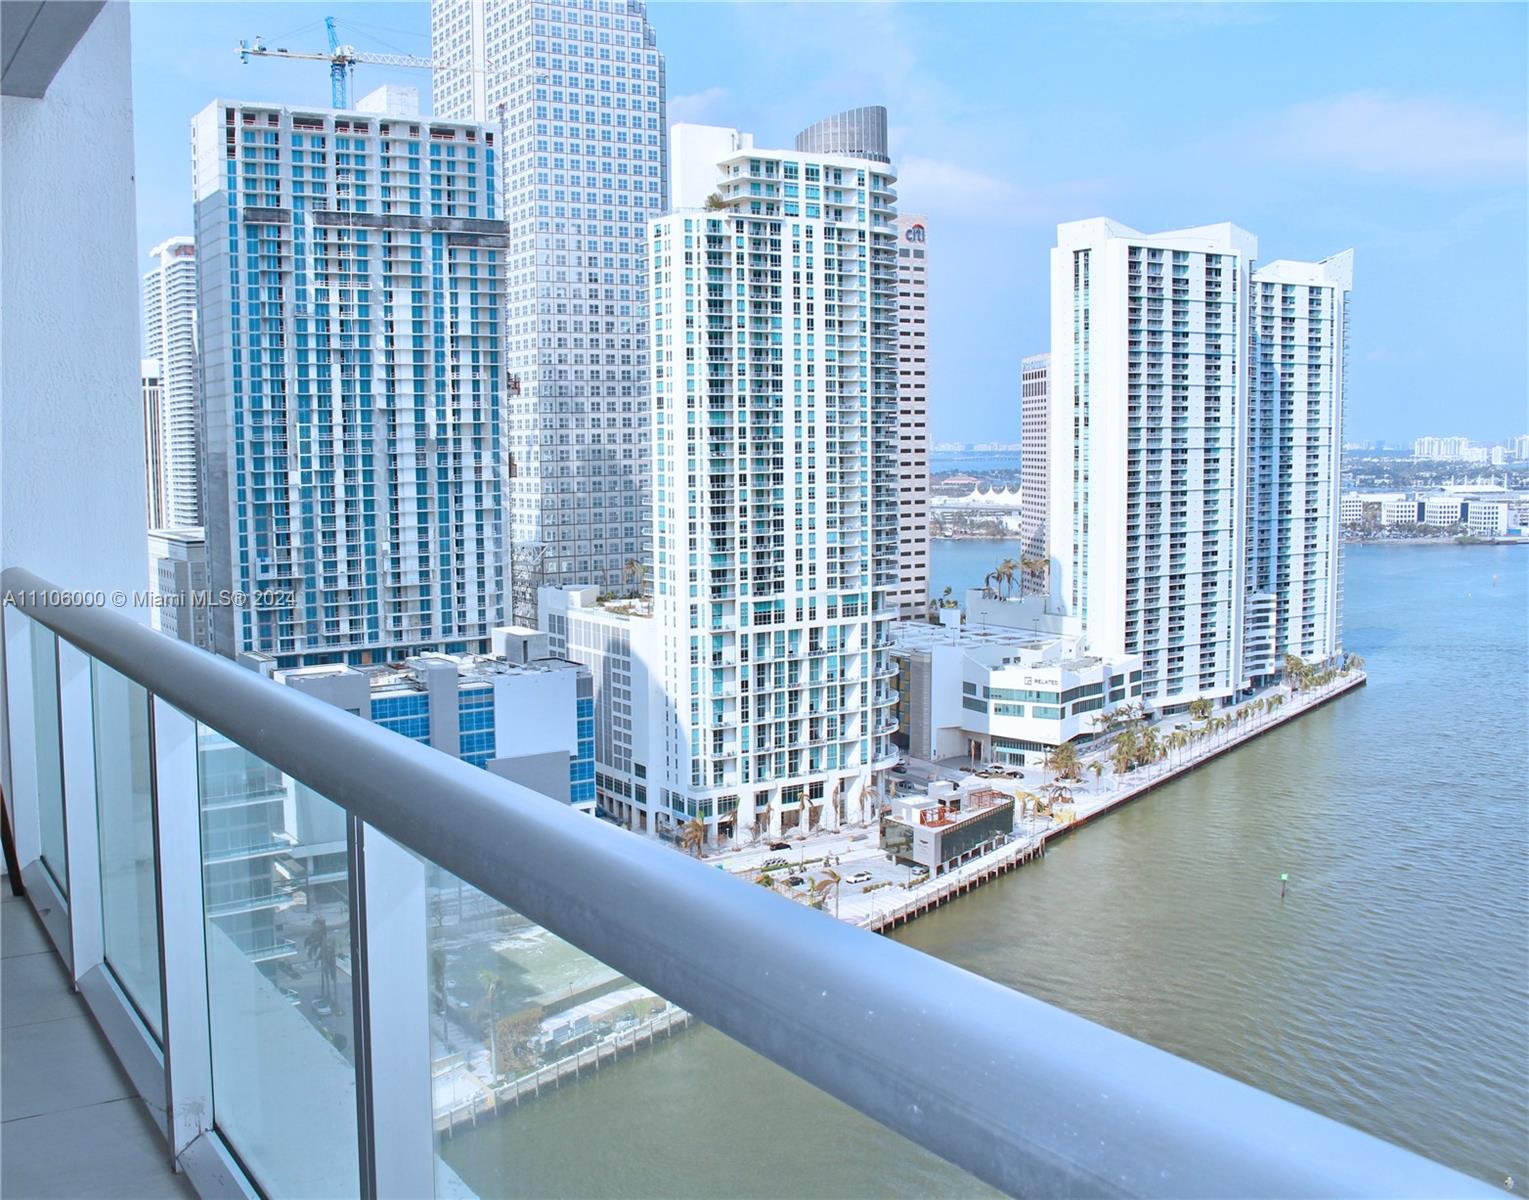 Beautiful 2/2 corner apartment with spectacular ocean views, luxury finishes and fully furnished. Subzero and Miele appliances. 
Enjoy being in the heart of Miami and having restaurants like Cipriani and Cantina La Veinte within ICON and many more at walking distance. Go shopping at Brickell City Center and do groceries walking because everything is so close. 
Enjoy the weather and take a leisurely walk along the bay or party. All at walking distance.
NO SUBLEASE ALLOWED

*****The apartment is available for MONTHLY RENTALS*****